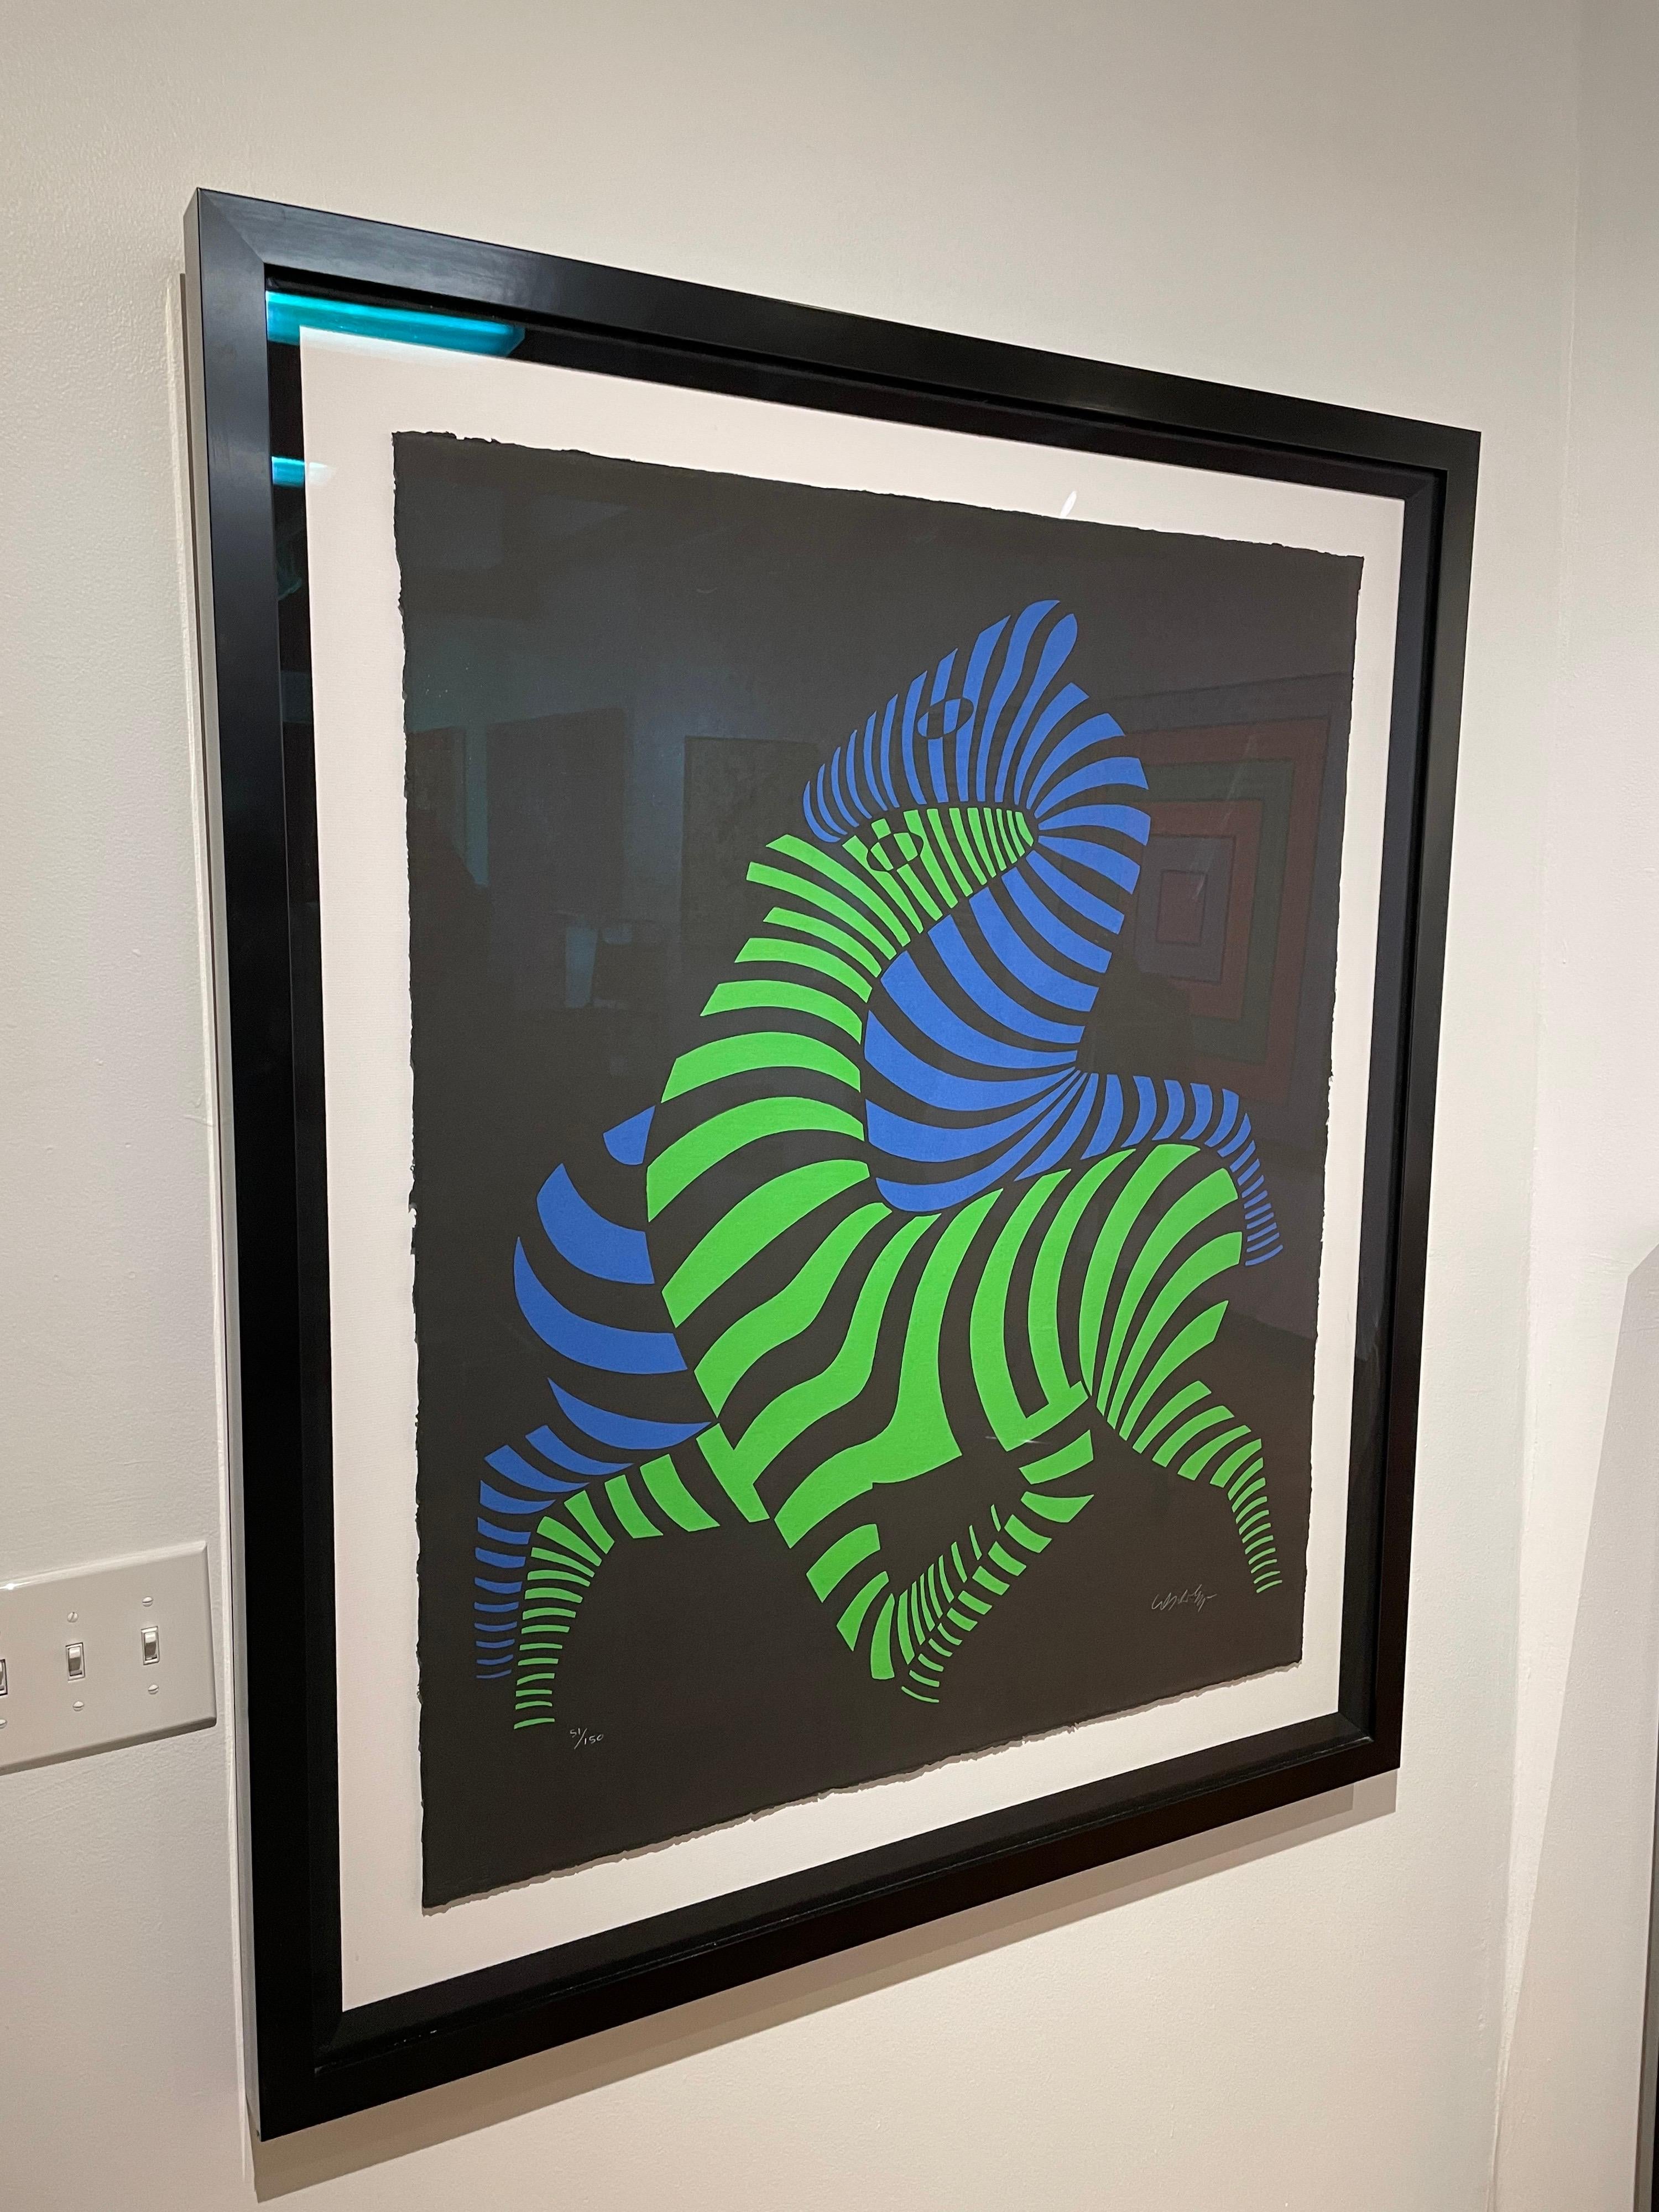 North American X Large Freshly Framed Zebras Serigraph Signed & Numbered by Victor Vasarely